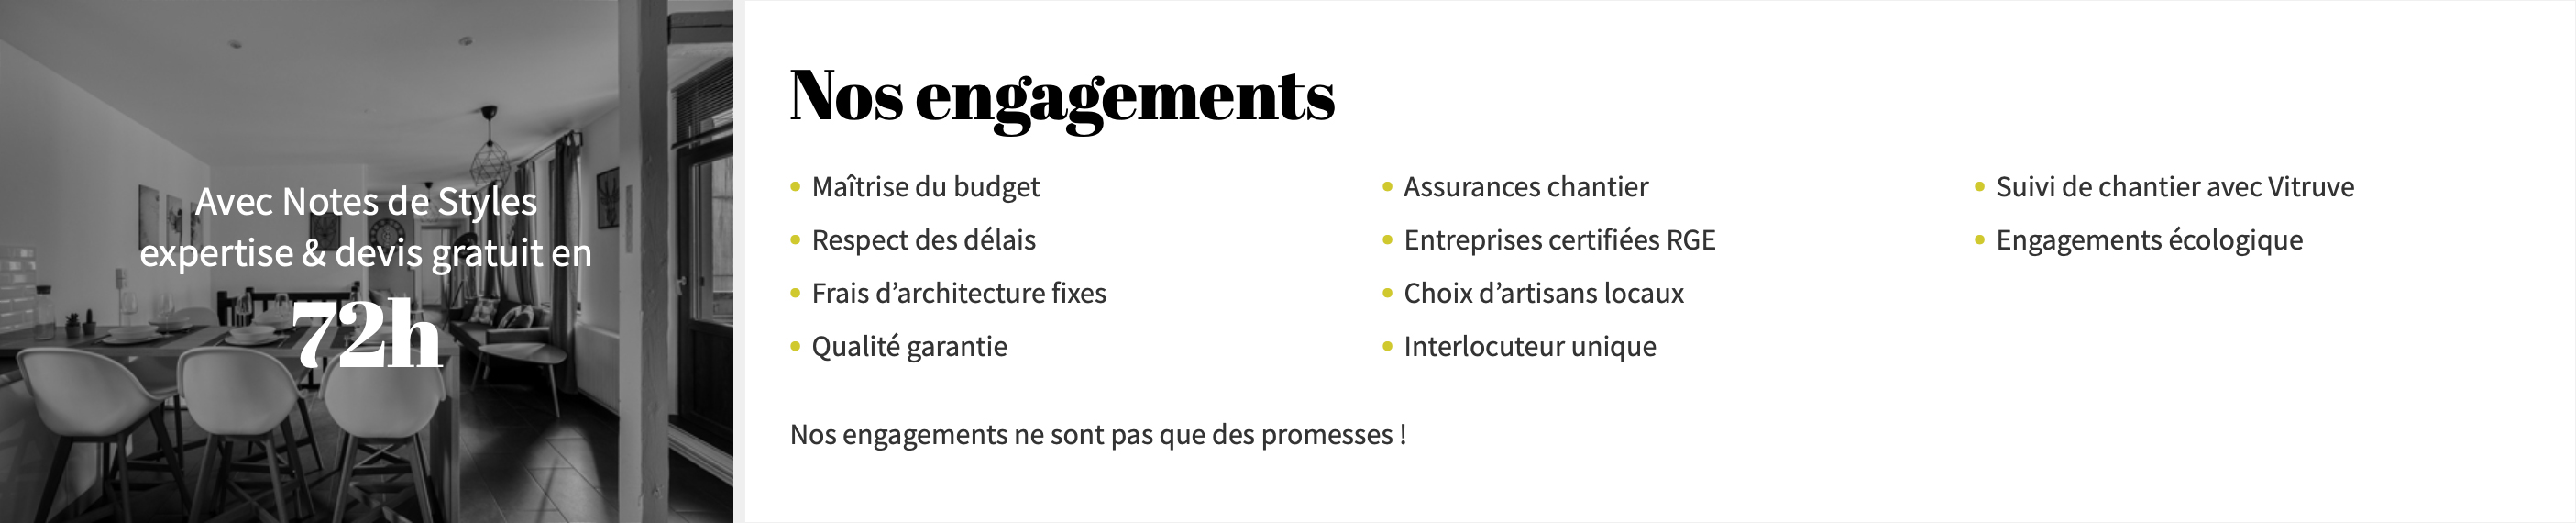 Notes de Styles Massy - Nos engagements